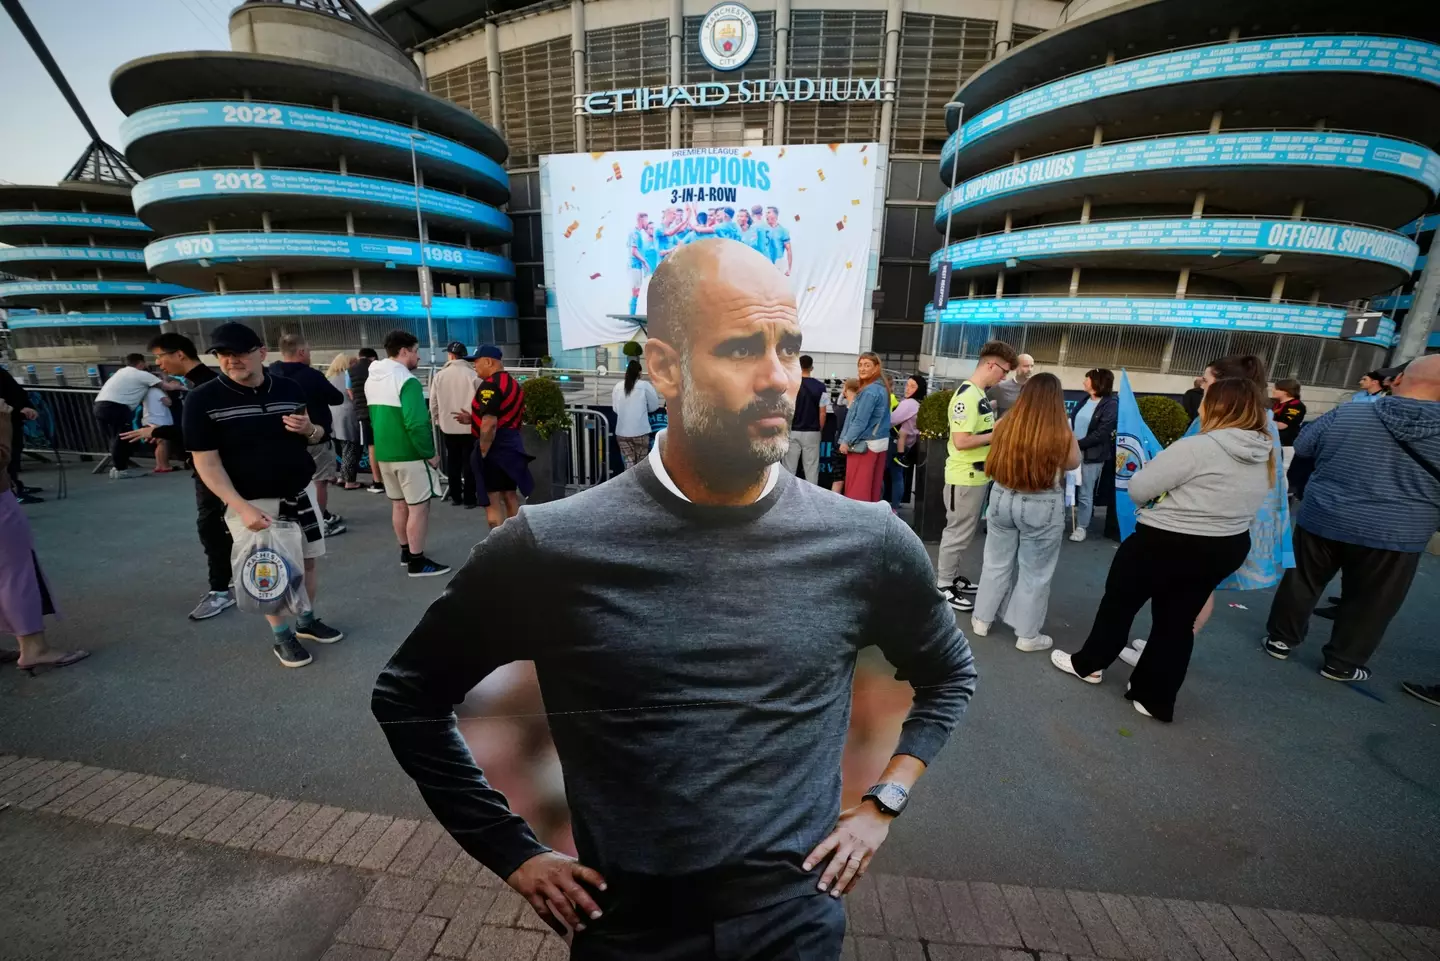 A Pep Guardiola cut-out stands in front of the Etihad as a crowd gathers. Image: Alamy